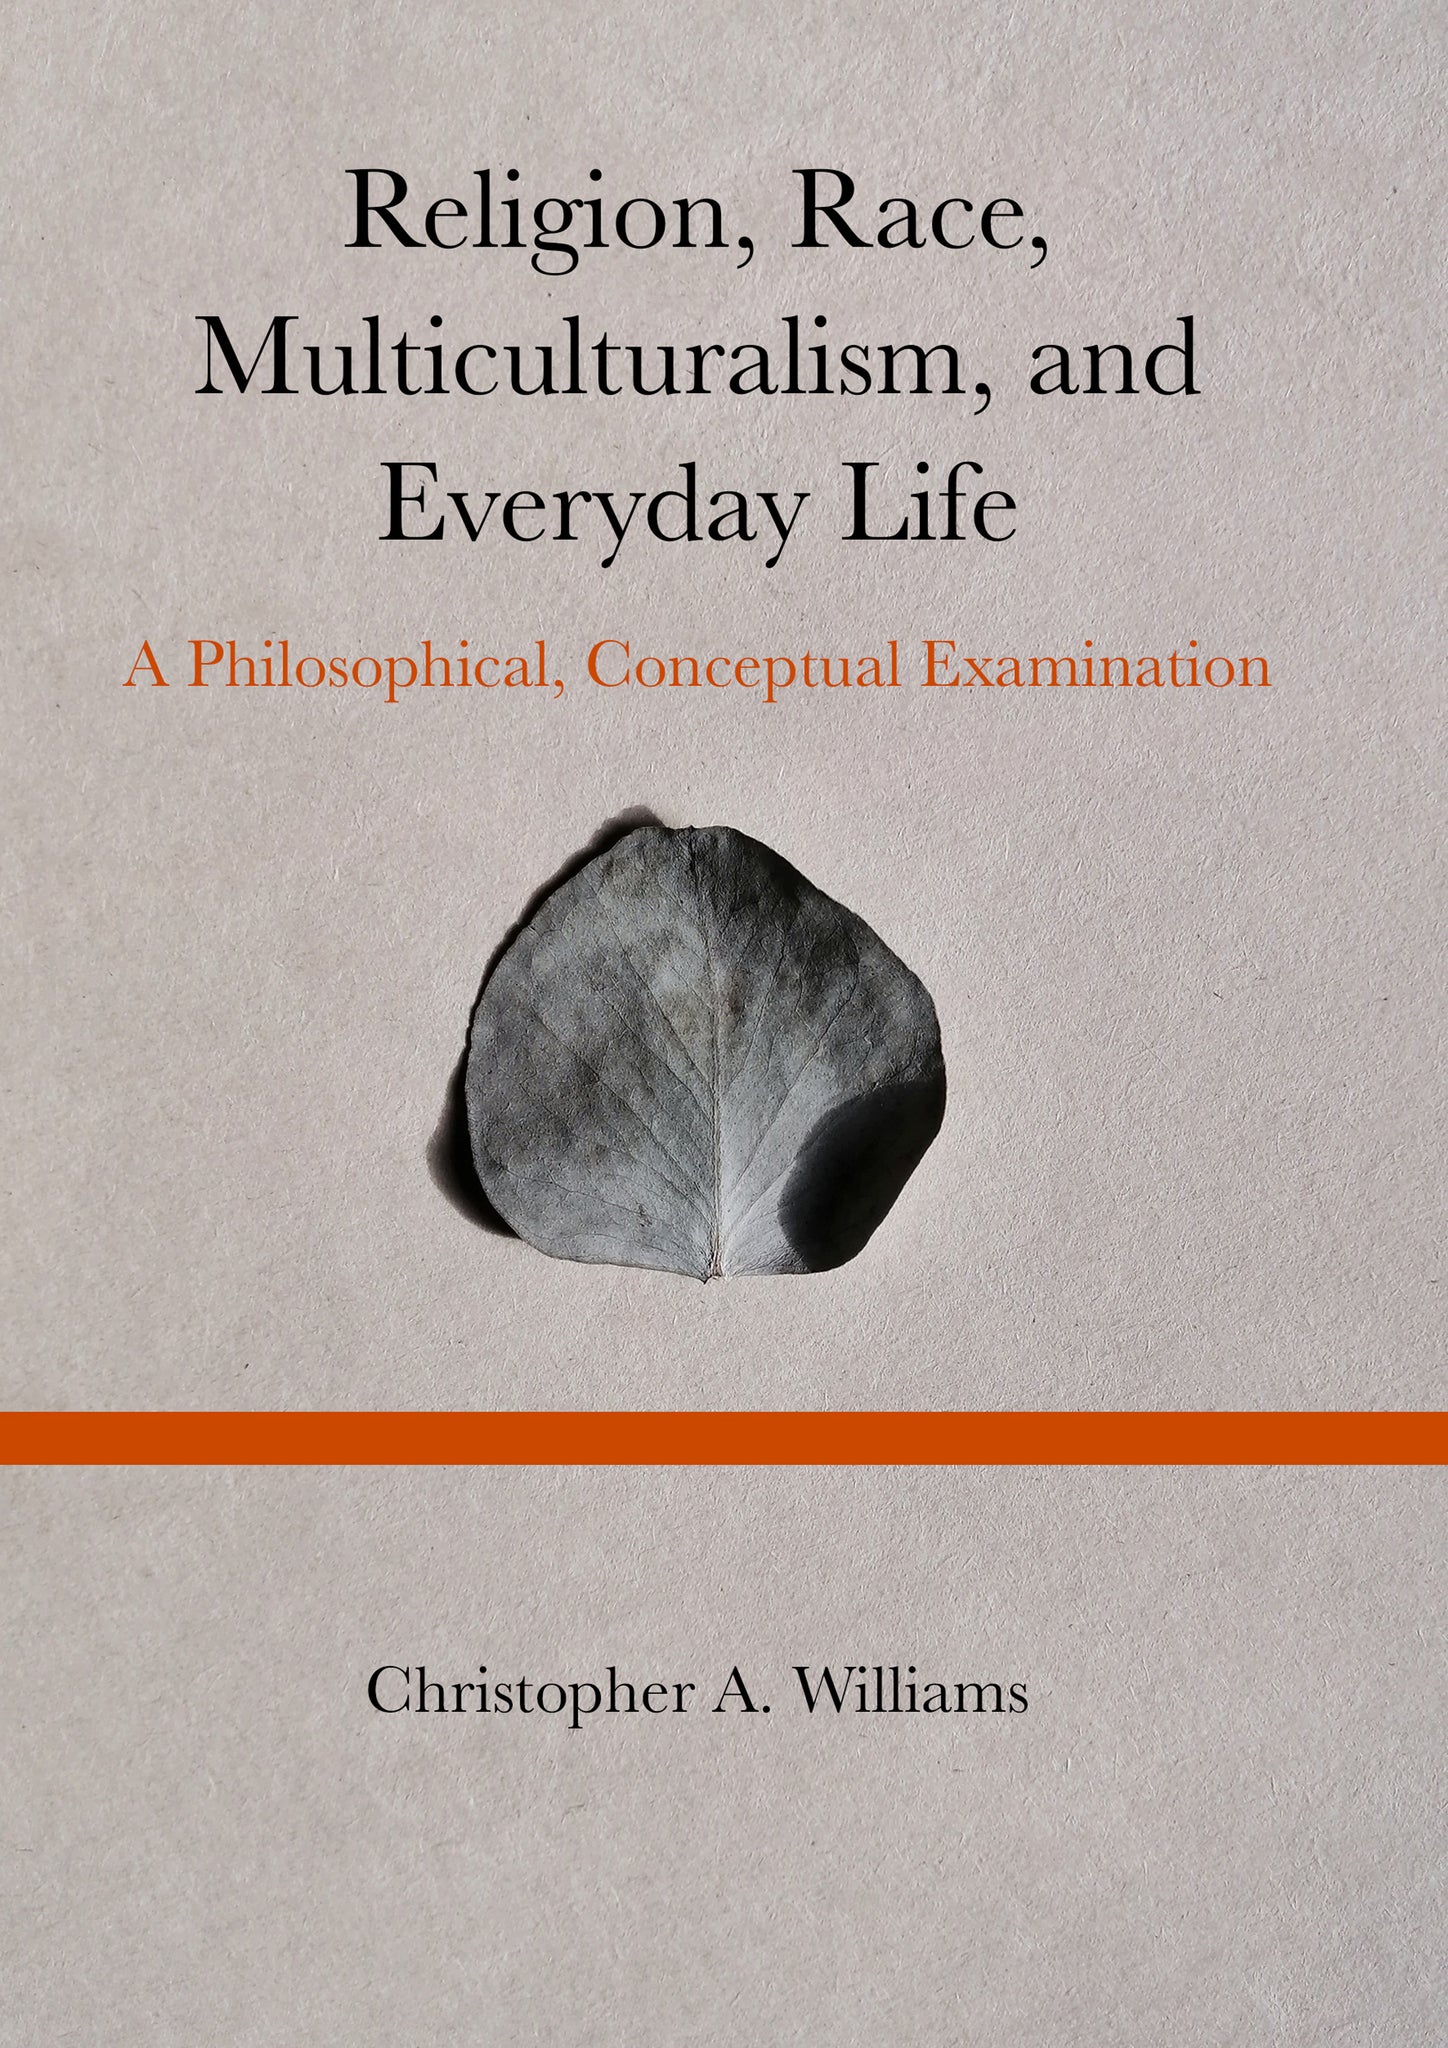 Religion, Race, Multiculturalism, and Everyday Life: A Philosophical, Conceptual Examination